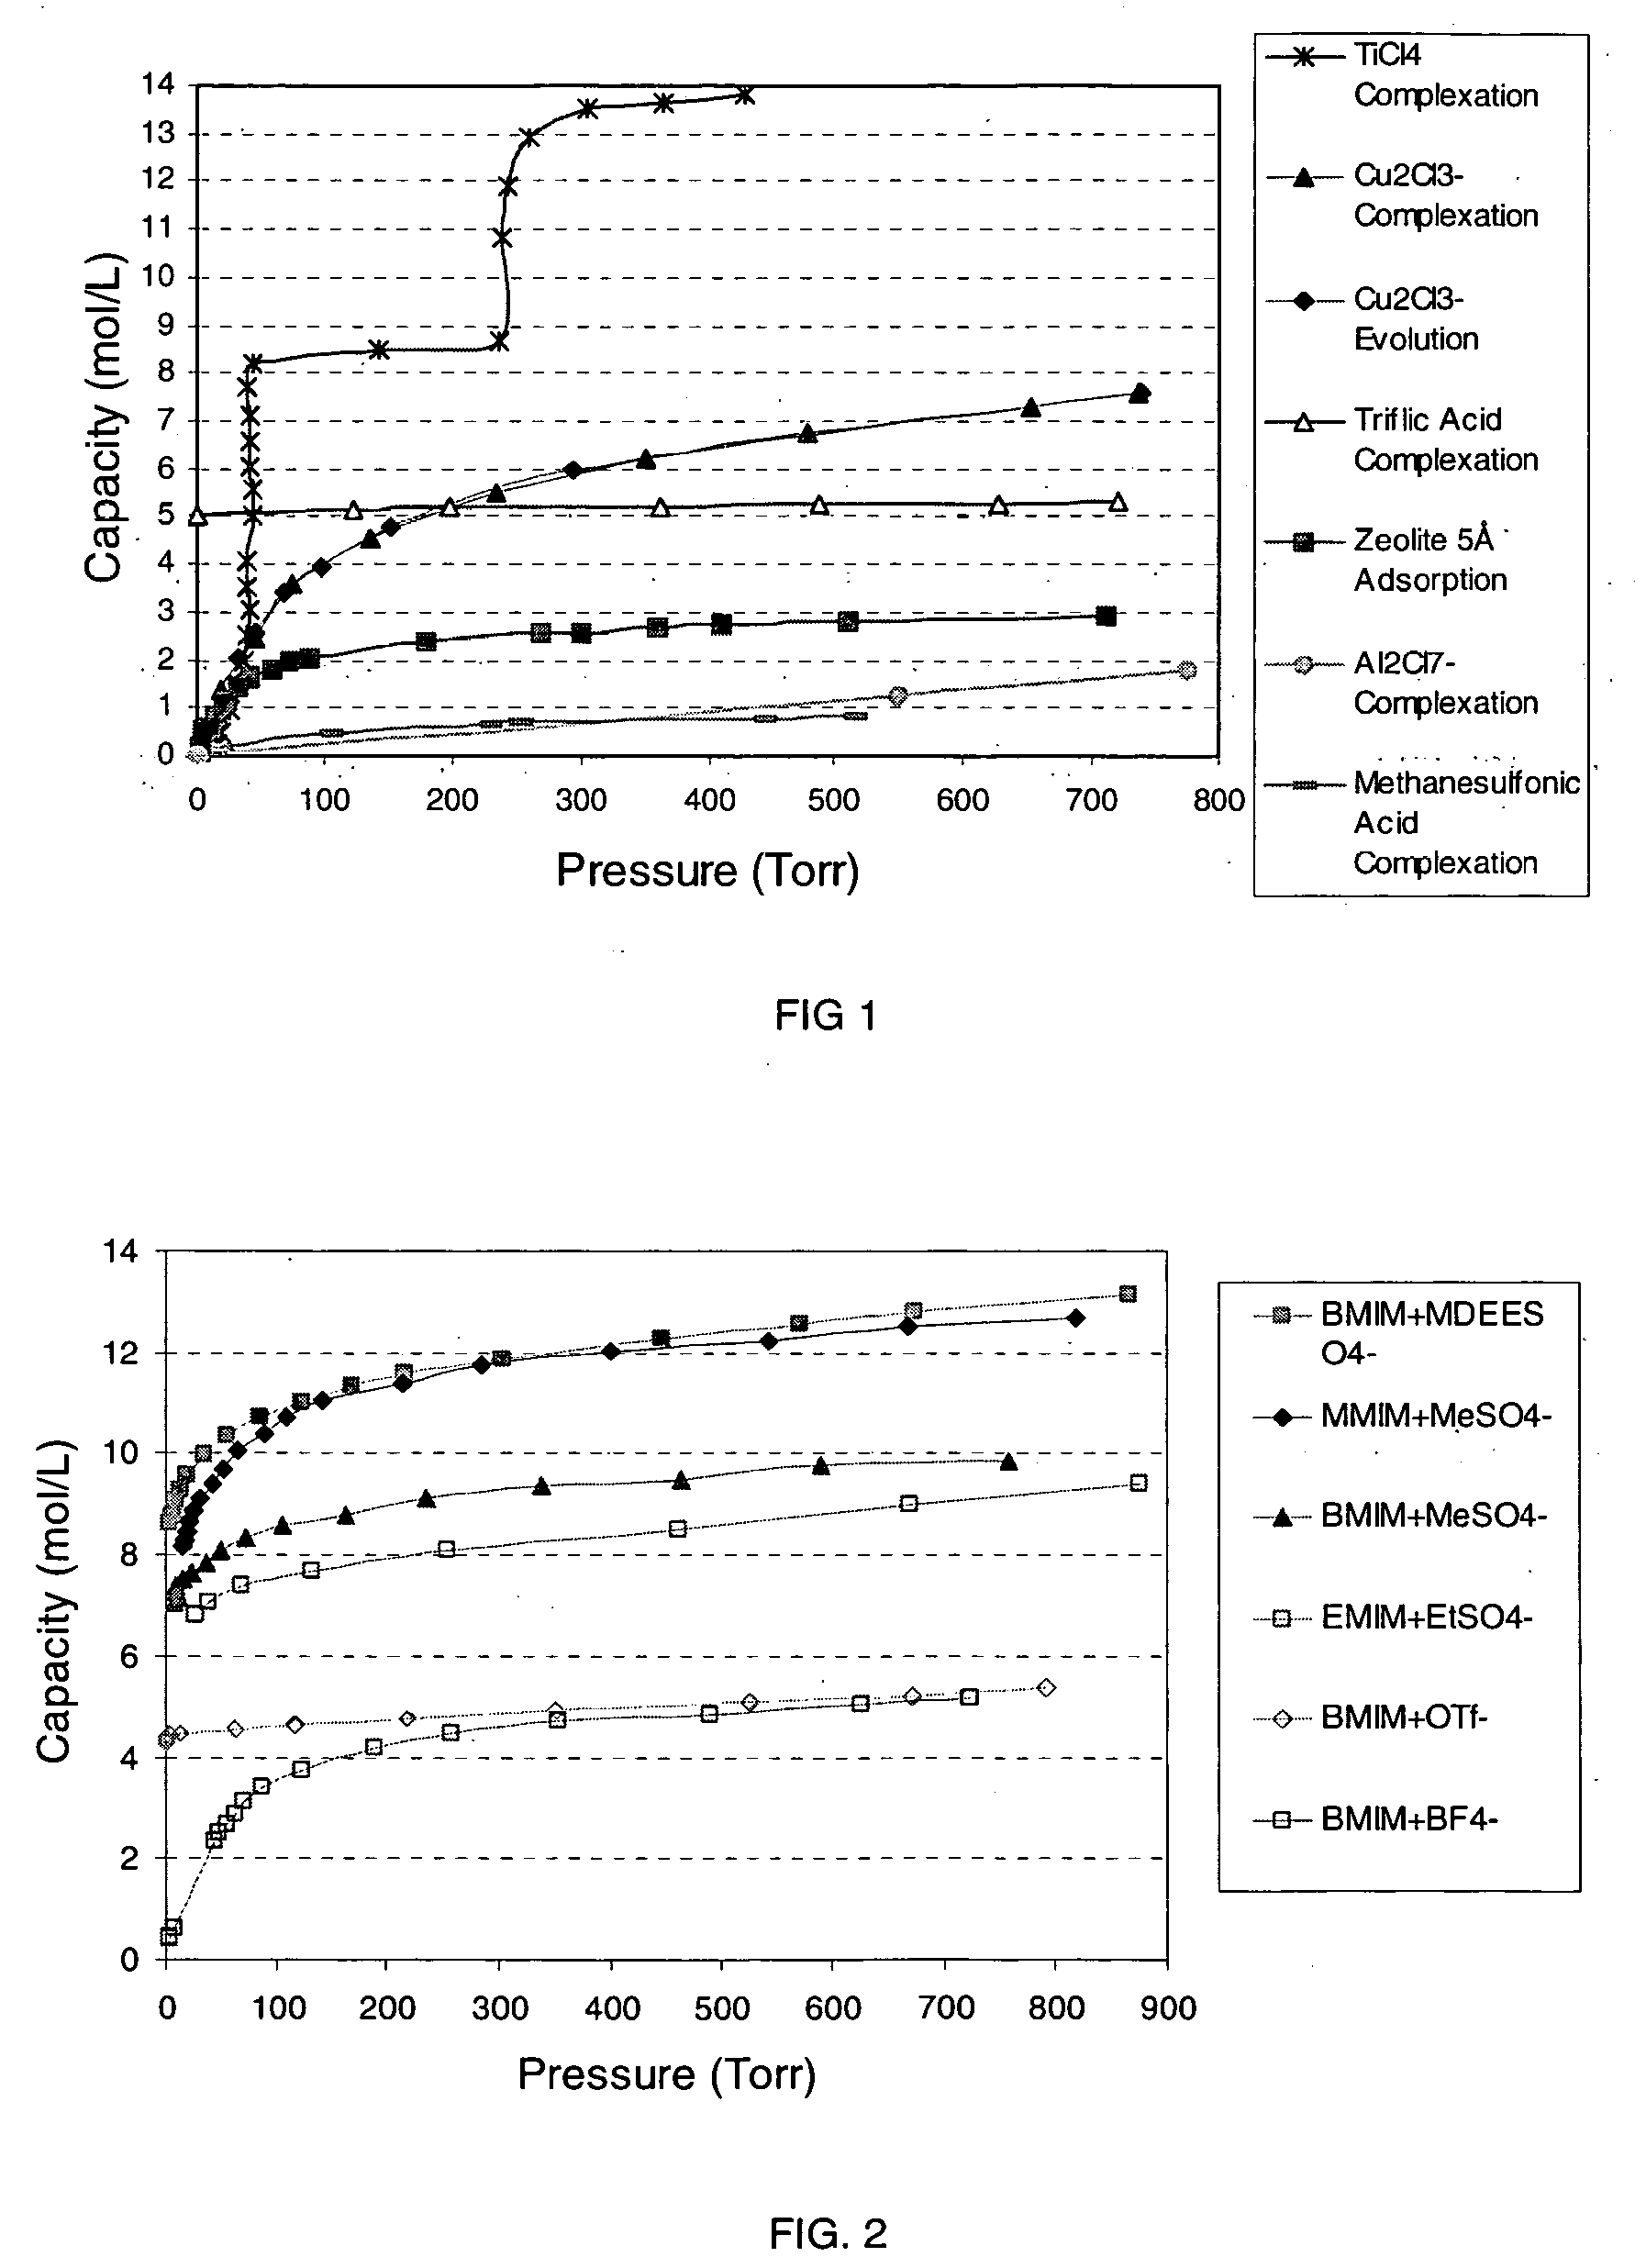 Ionic liquid based mixtures for gas storage and delivery